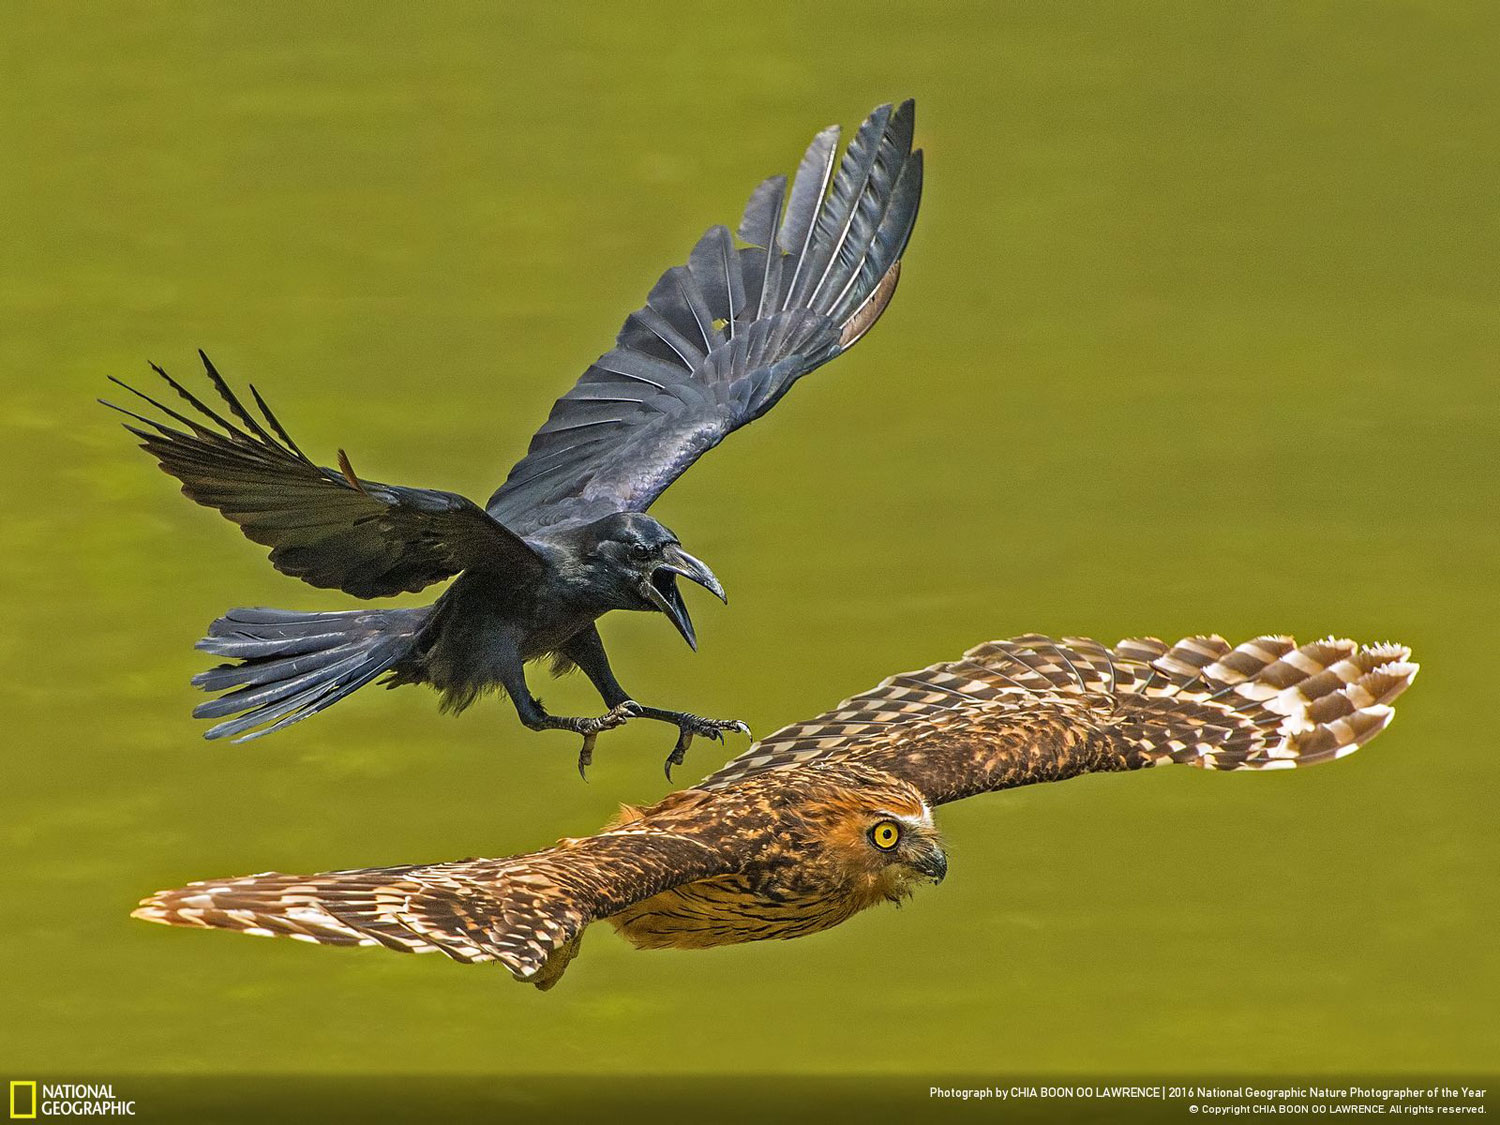 Crow chasing Puffy Owl // Photo and caption by CHIA BOON OO LAWRENCE